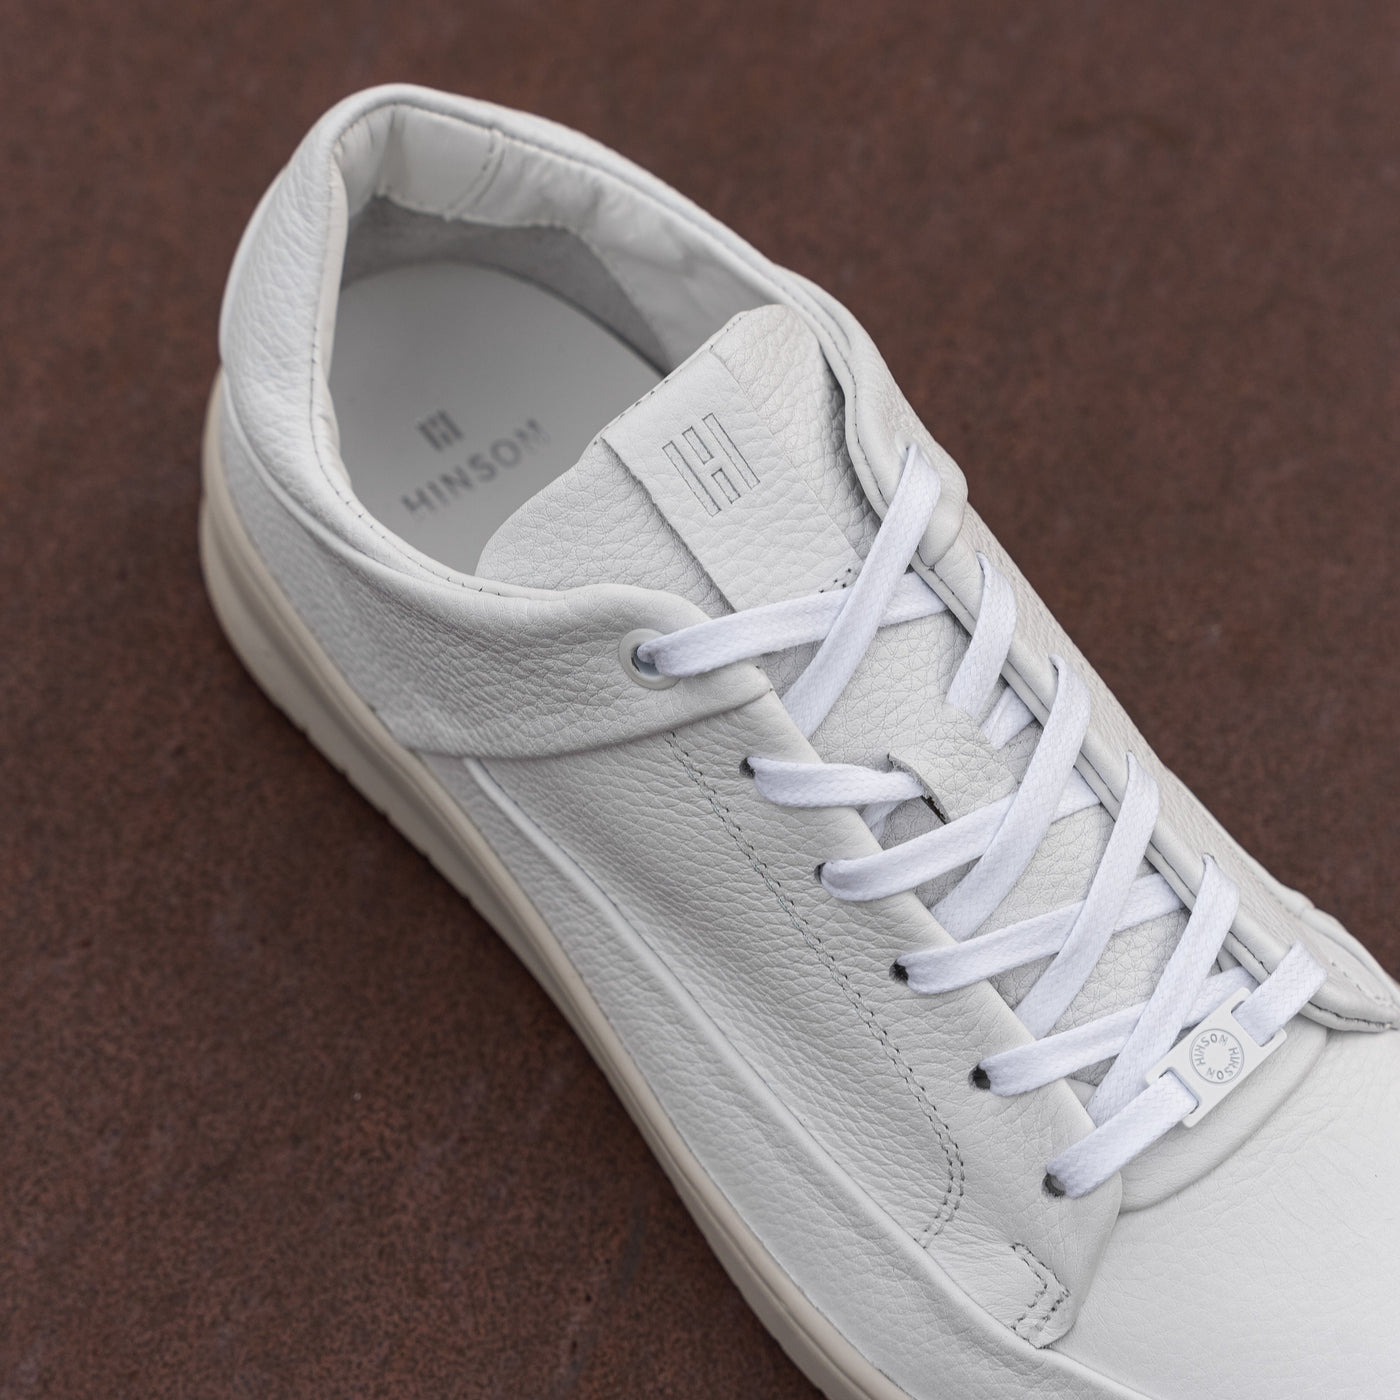 BENNET P4 LOW White Leather Milled OWS - HINSON | ALPINA